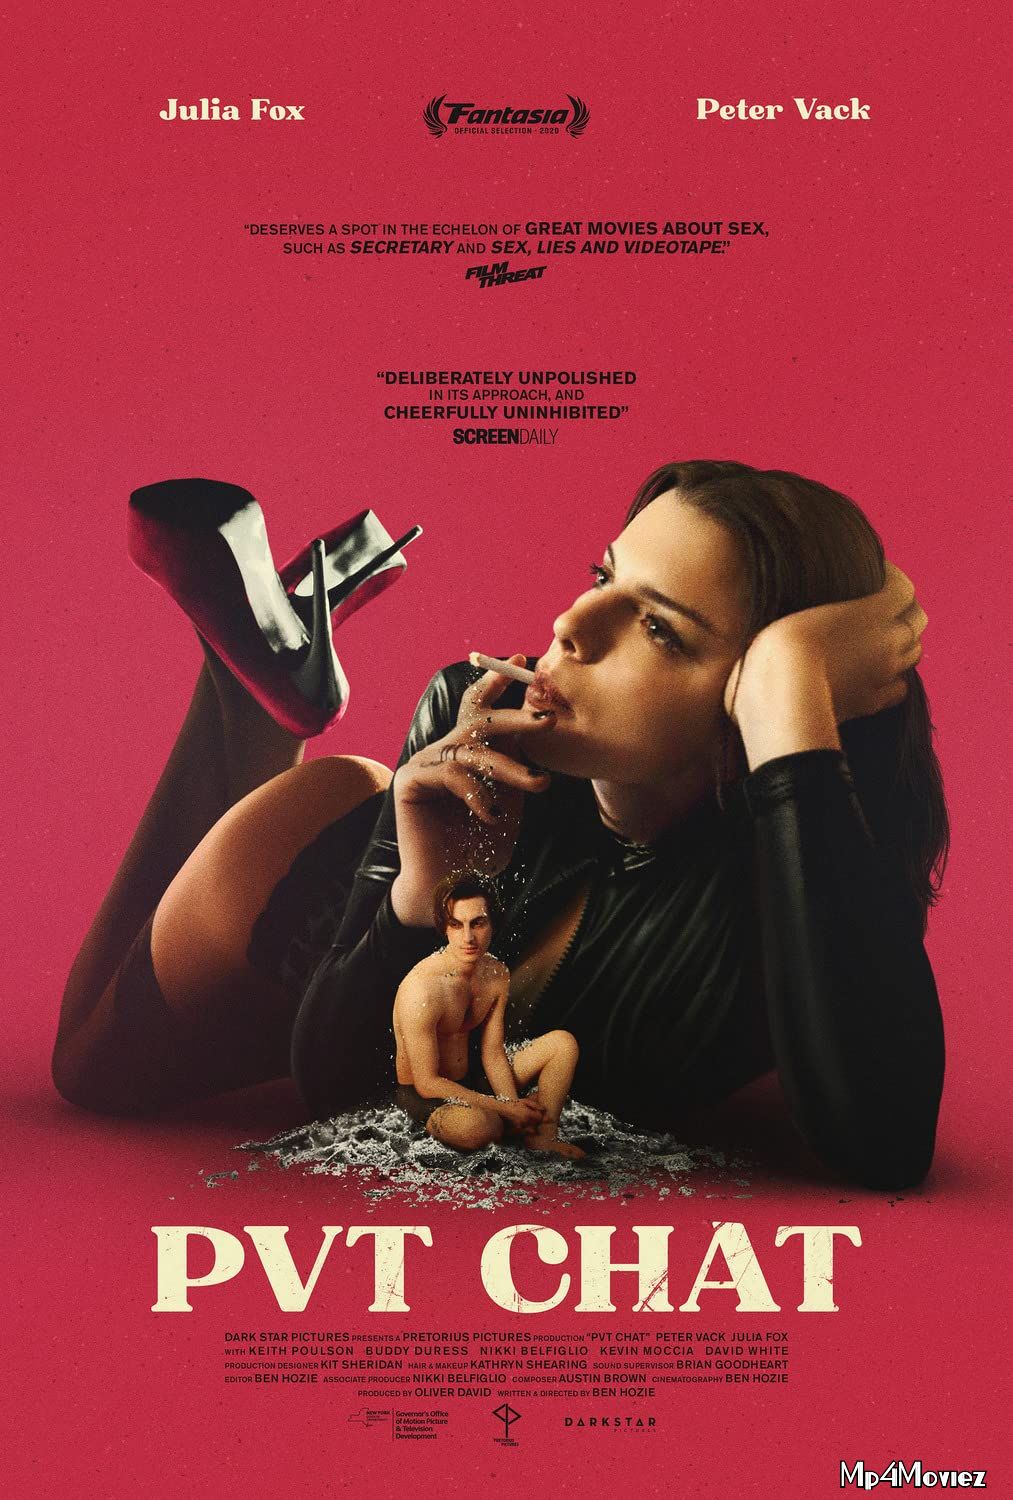 18+ PVT CHAT 2020 English UNRATED Movie HDRip download full movie